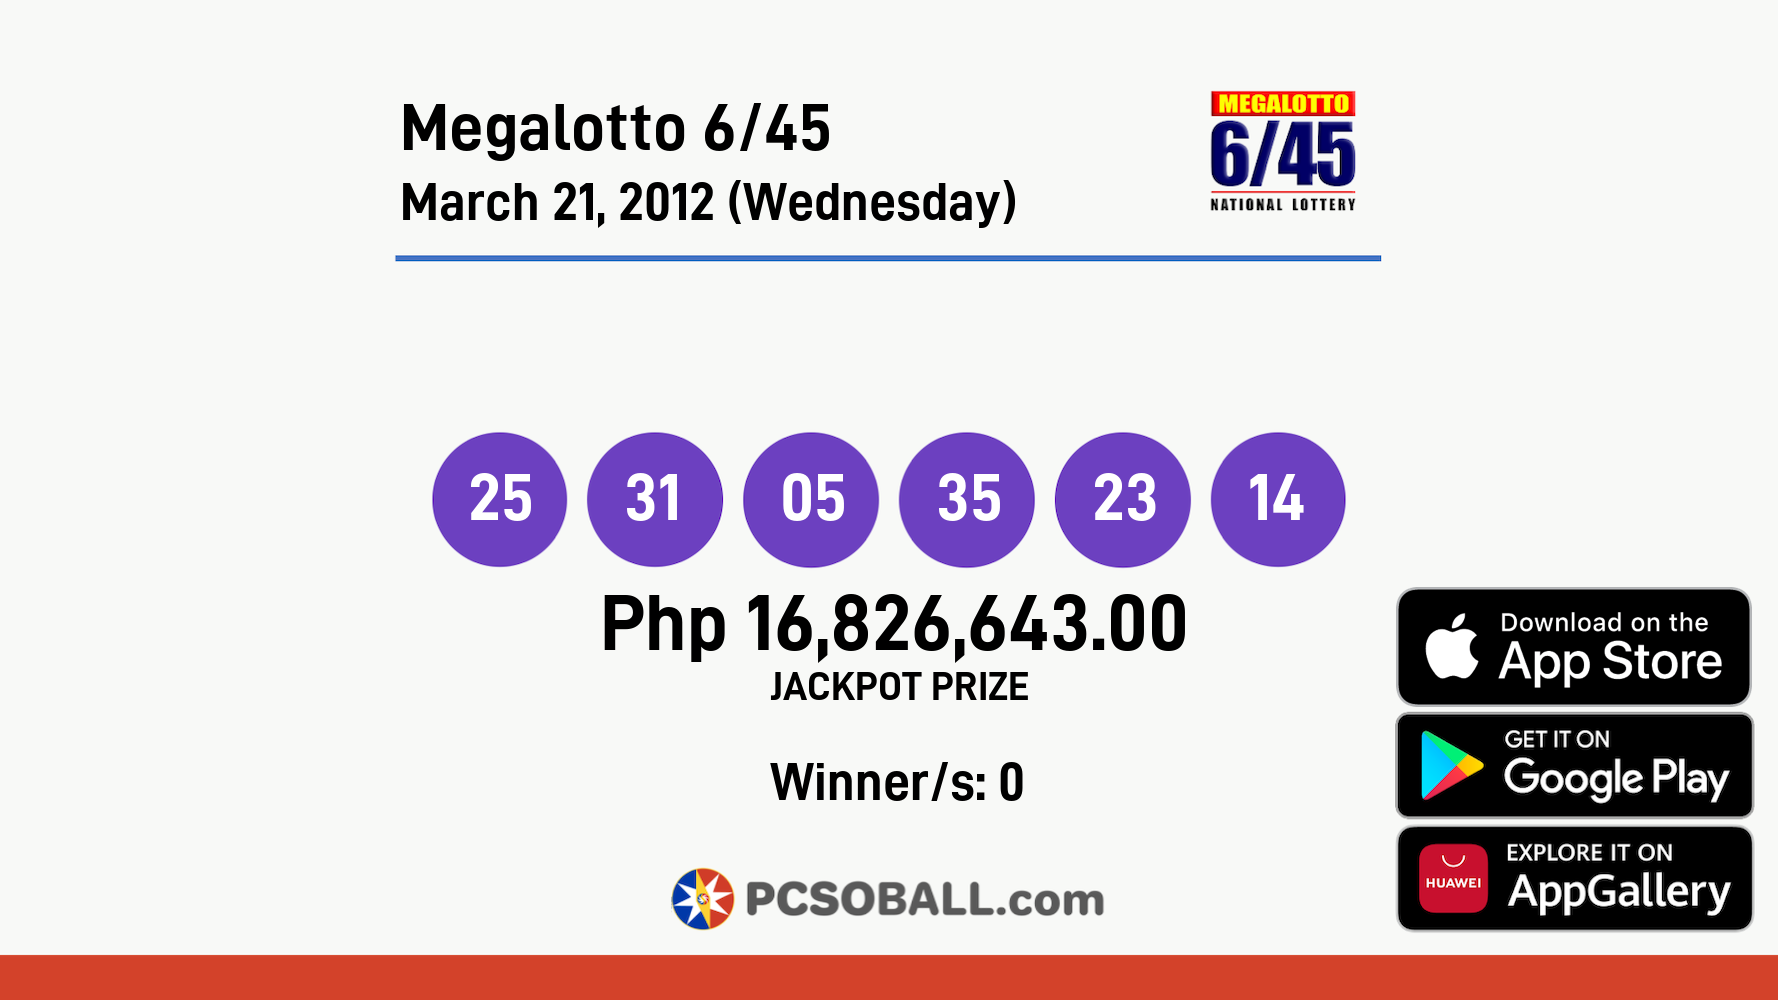 Megalotto 6/45 March 21, 2012 (Wednesday) Result